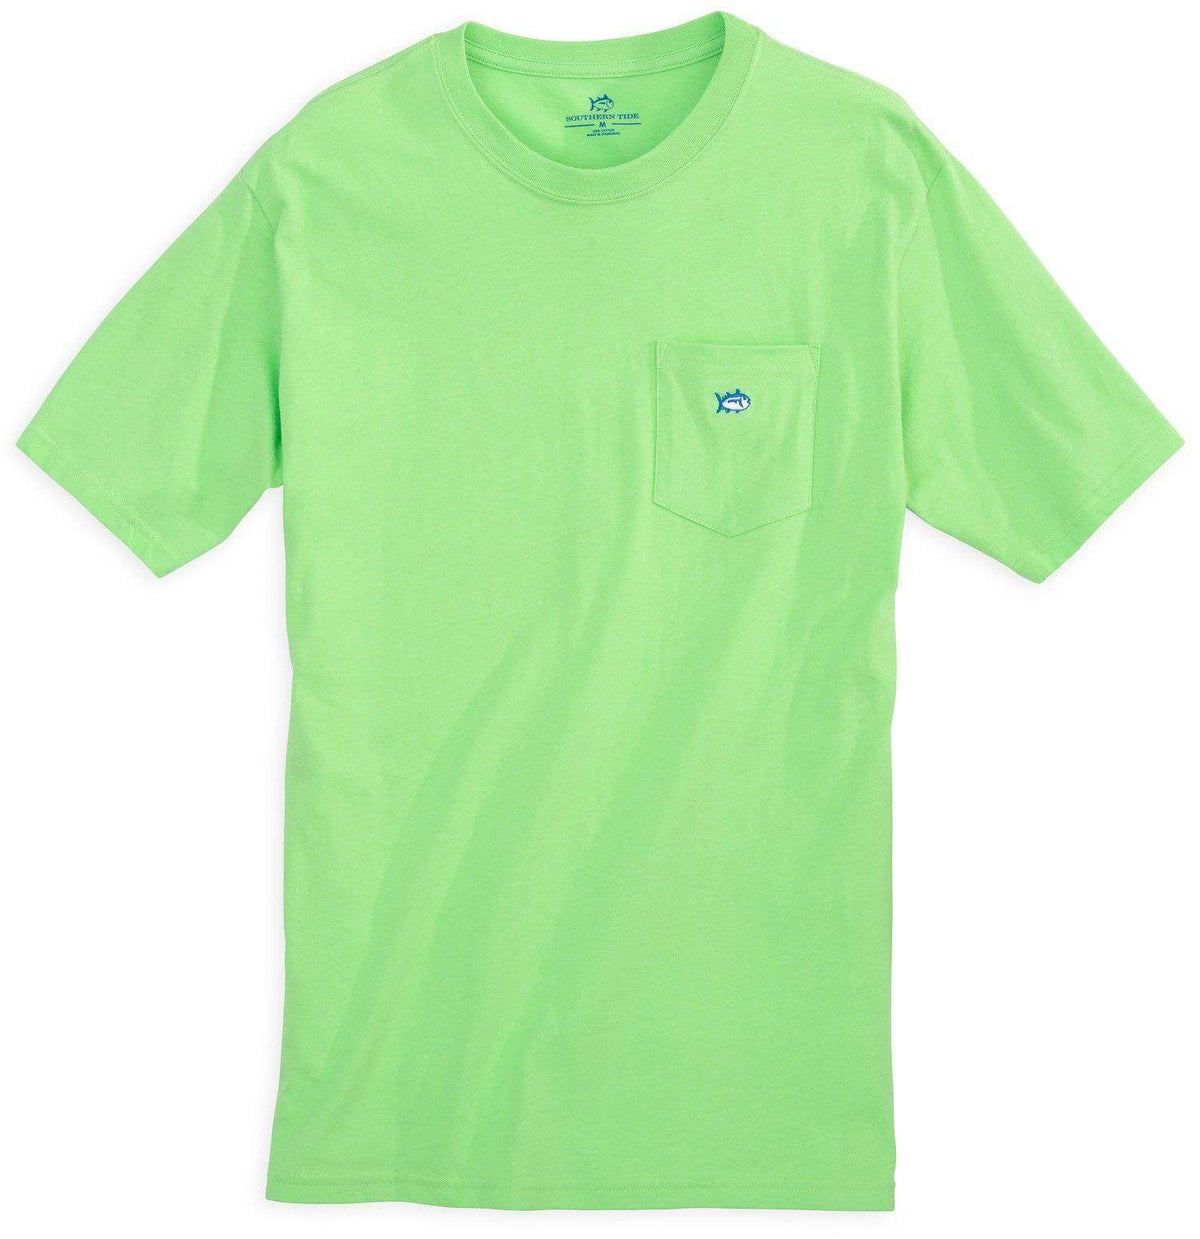 Embroidered Pocket Tee Shirt in Summer Green by Southern Tide - Country Club Prep